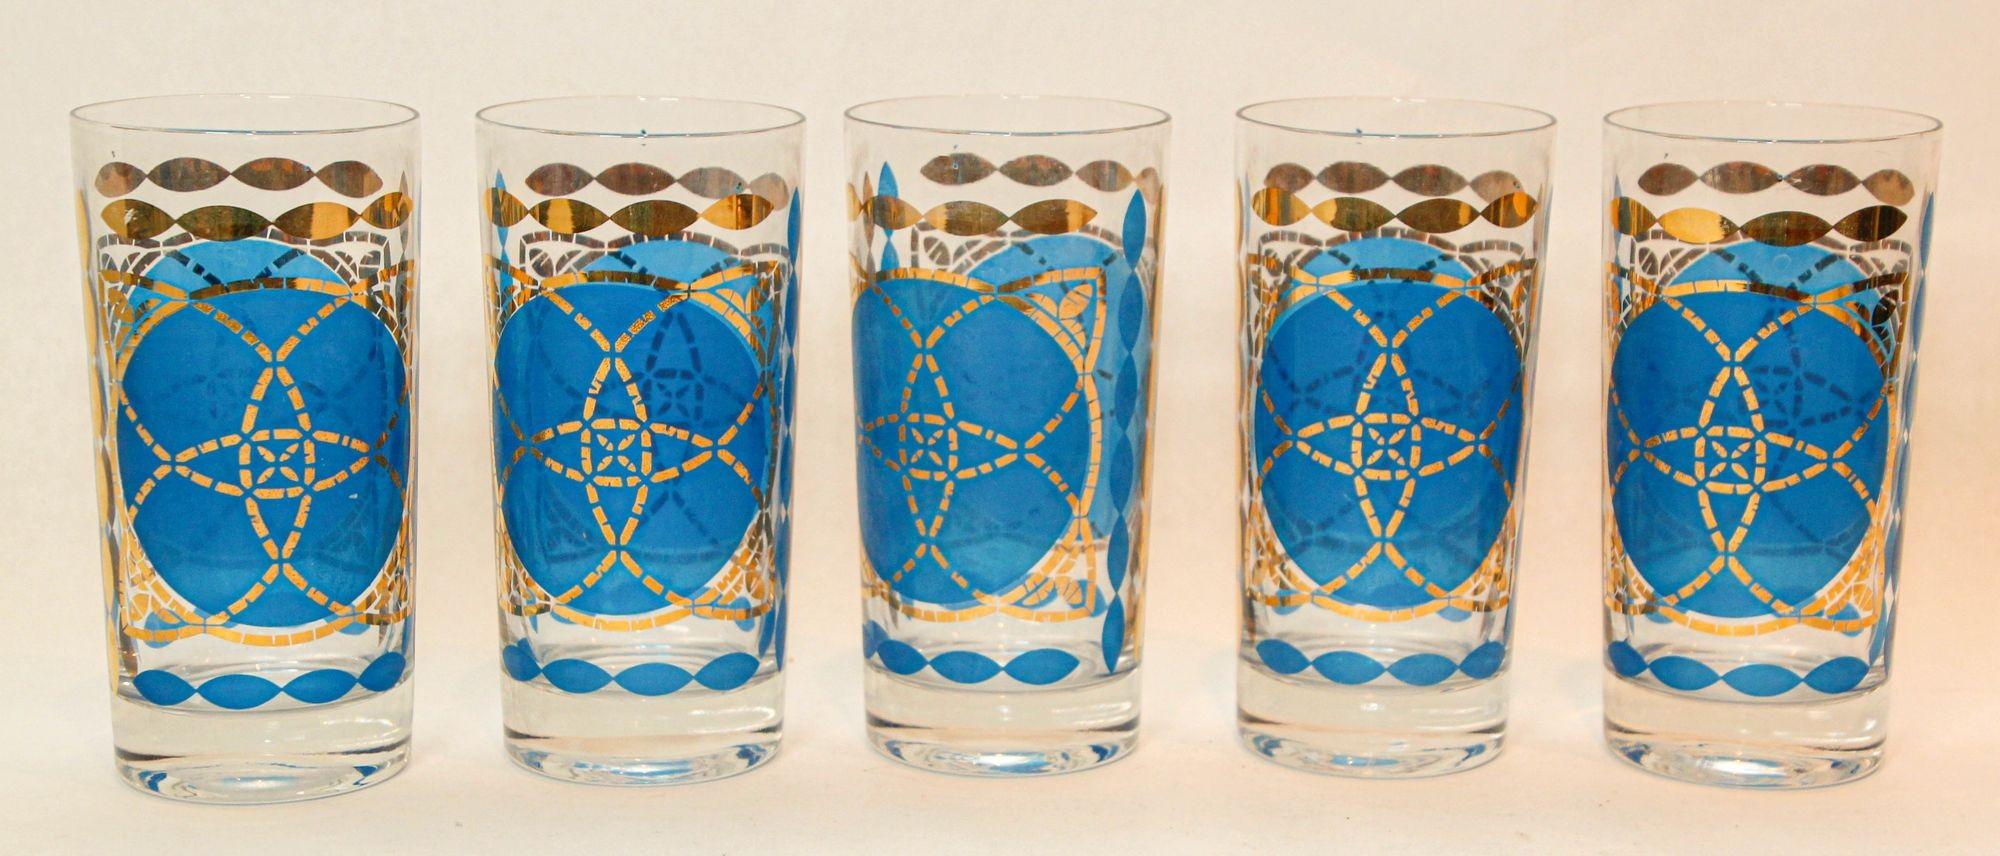 1960s Georges Briard Highball Cocktail Glasses Blue and Gold Design Set of 5 1